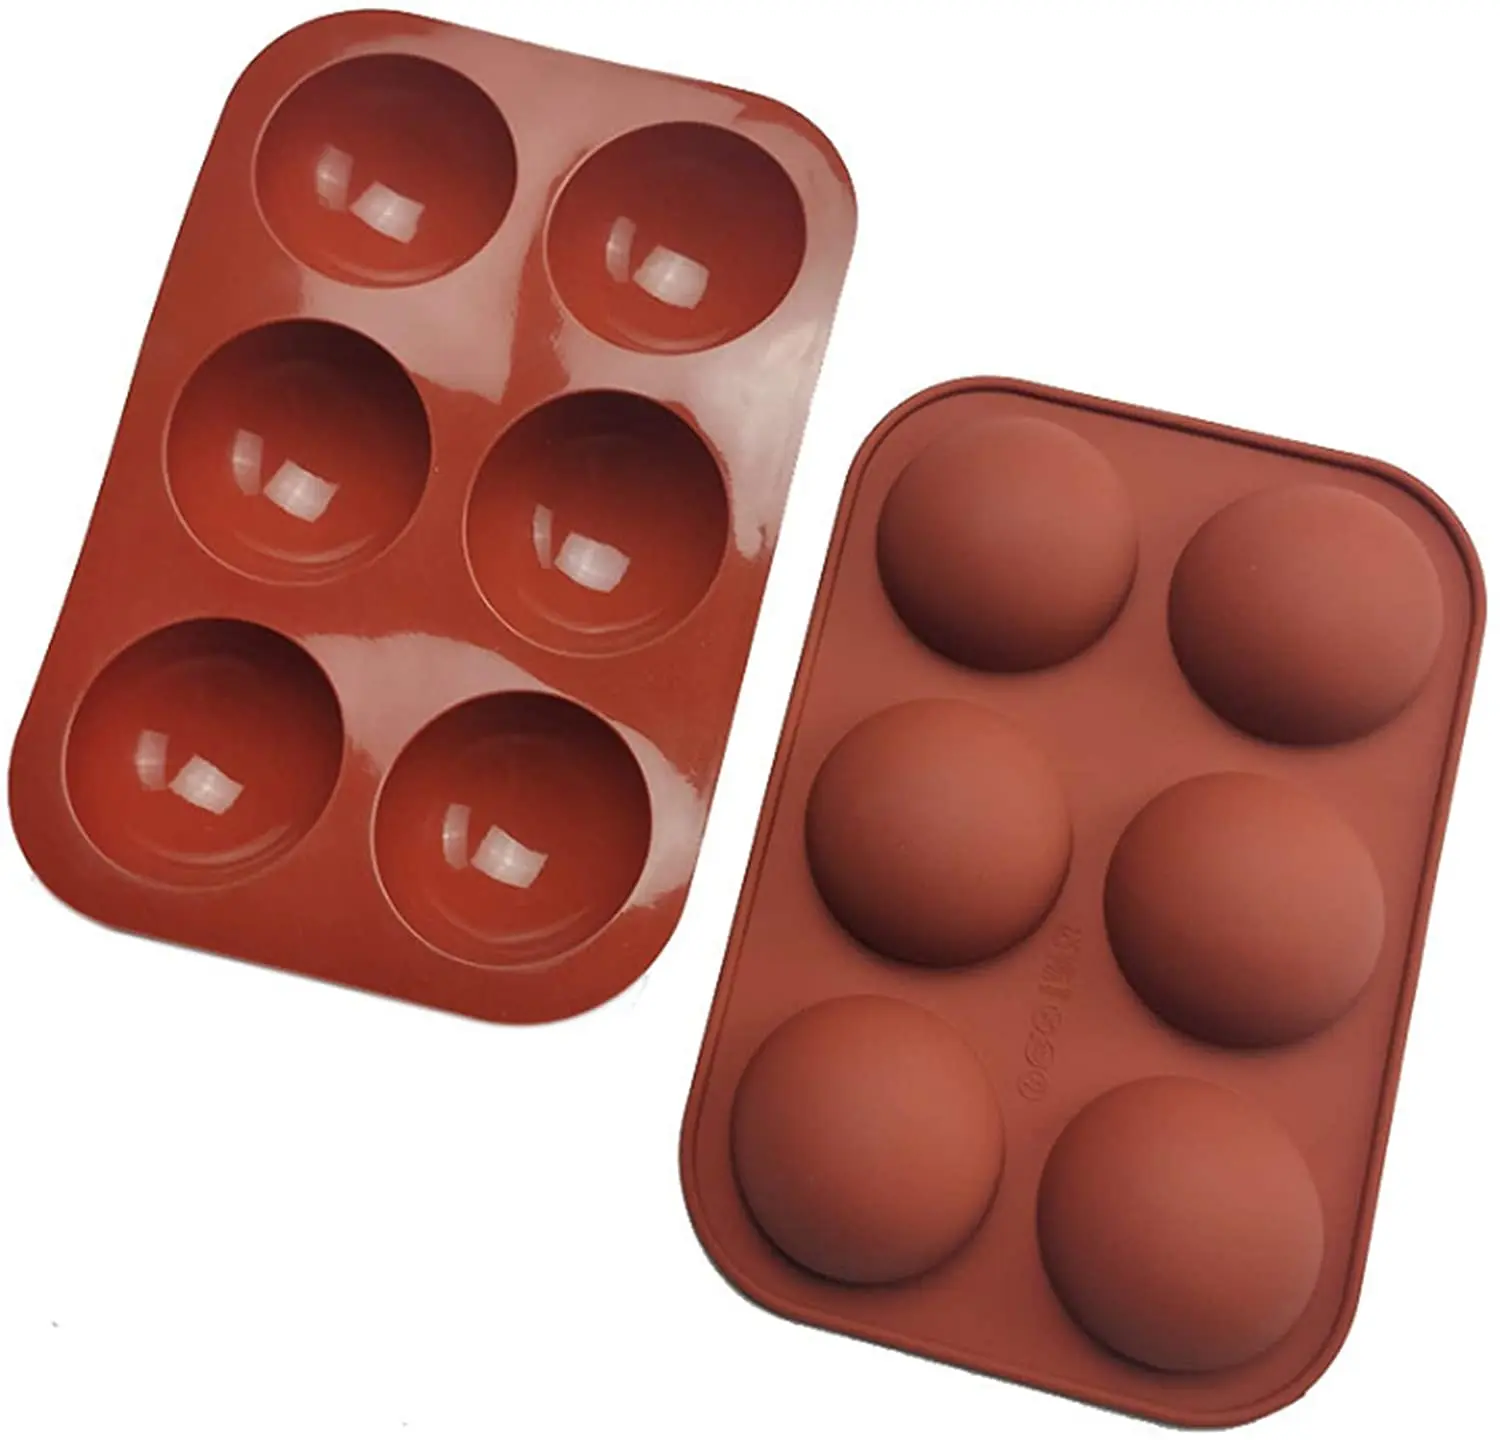 

Large 6 Holes Half Round Semi Sphere Silicone Baking Mold For Making Chocolate, Cake, Jelly, Dome Mousse, Customized color